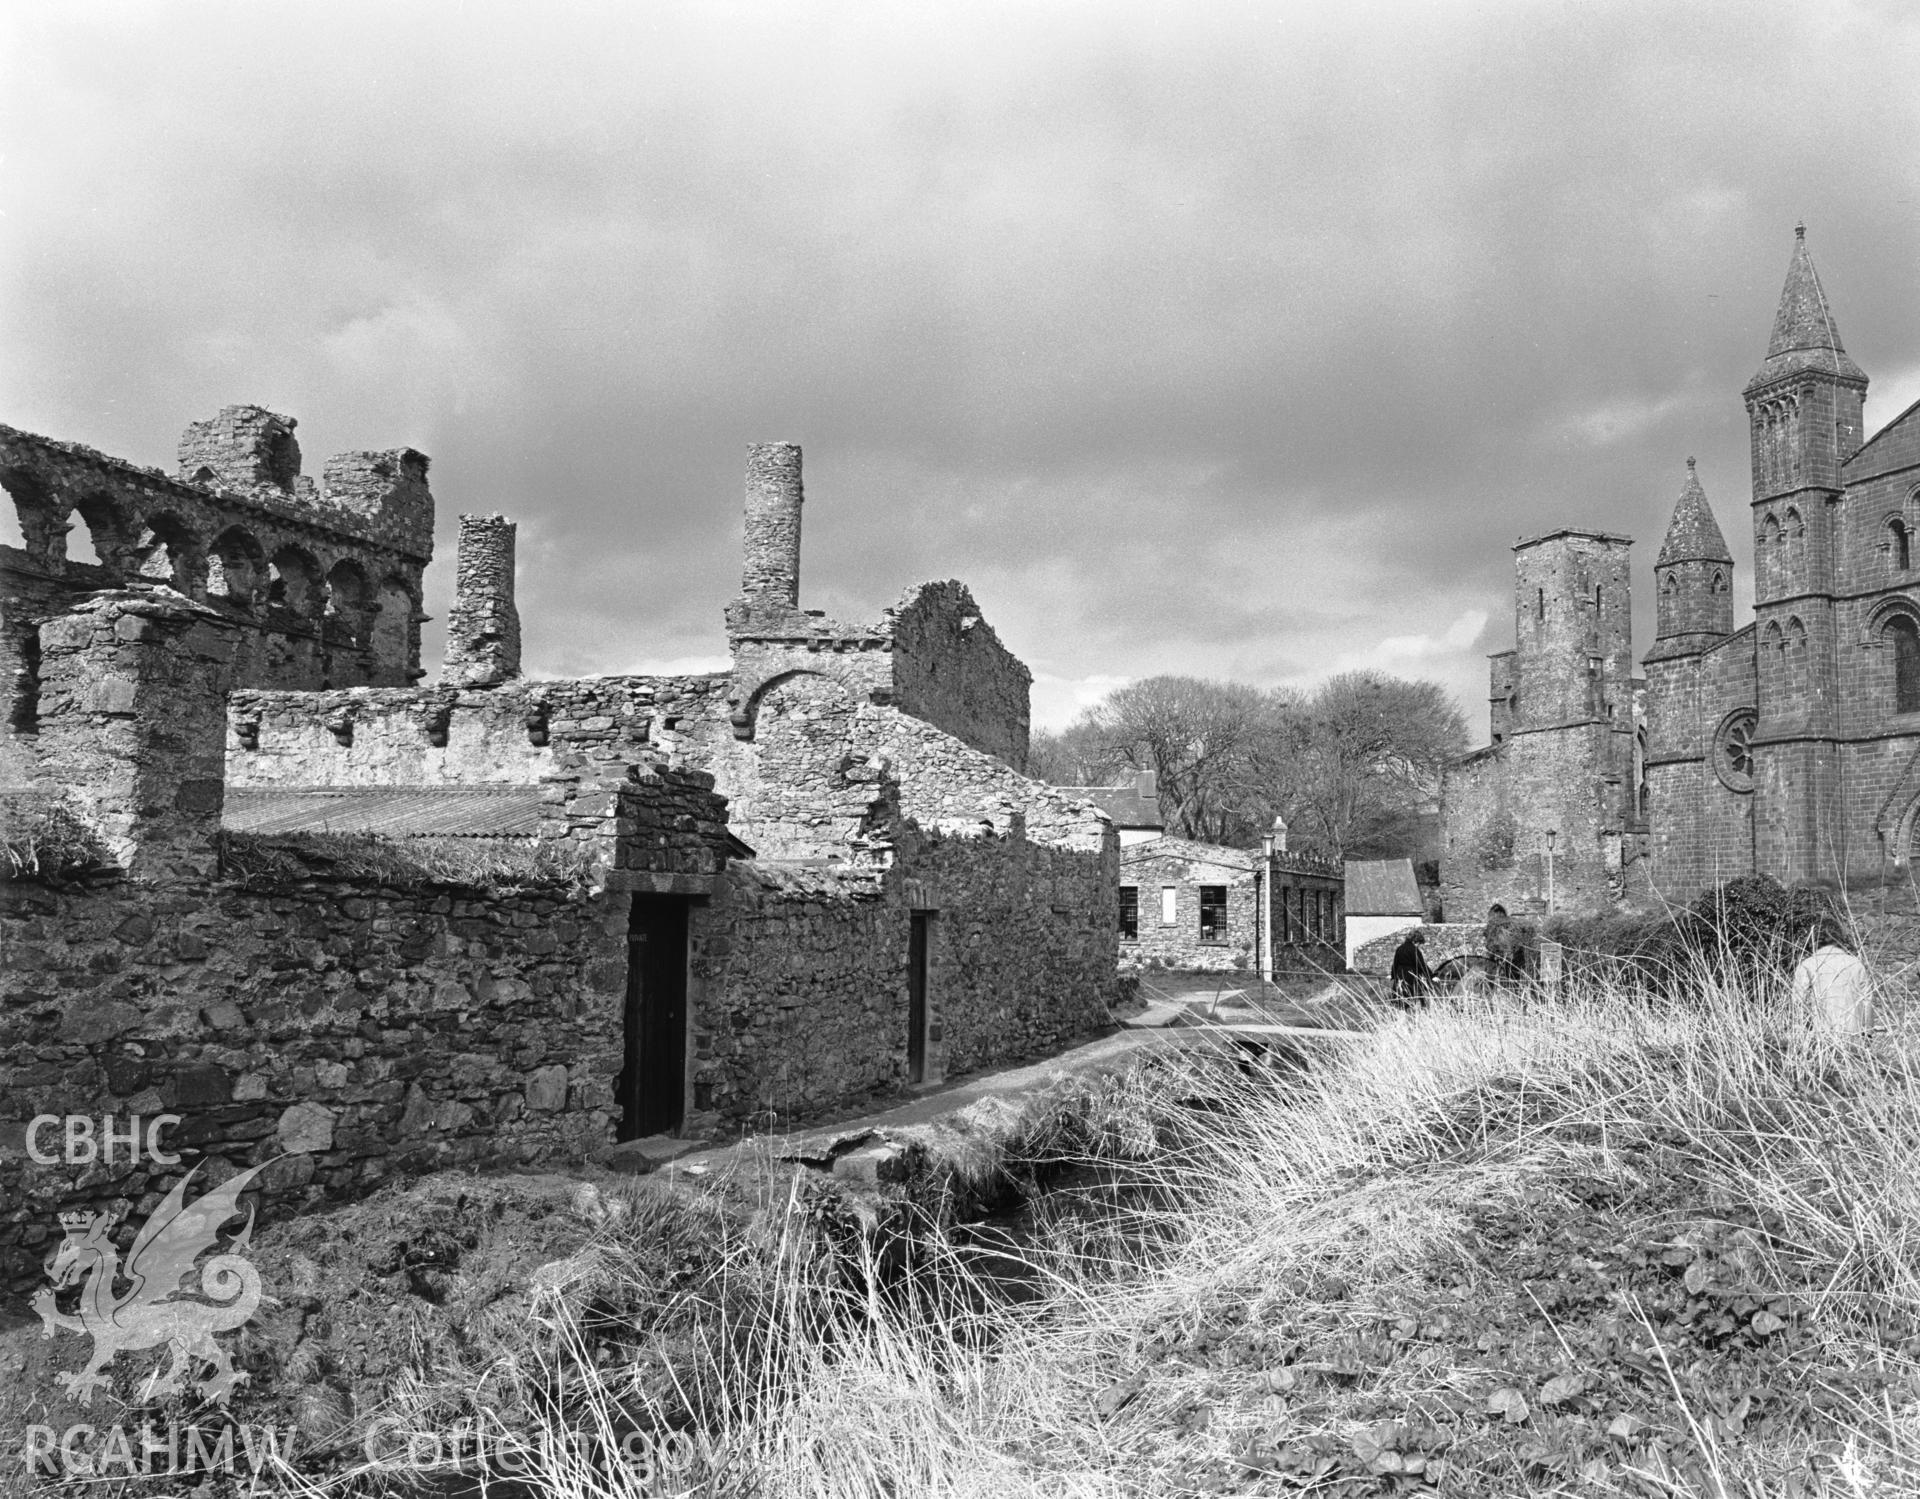 1 b/w print showing view of Bishop's Palace ruins, St David's; collated by the former Central Office of Information.